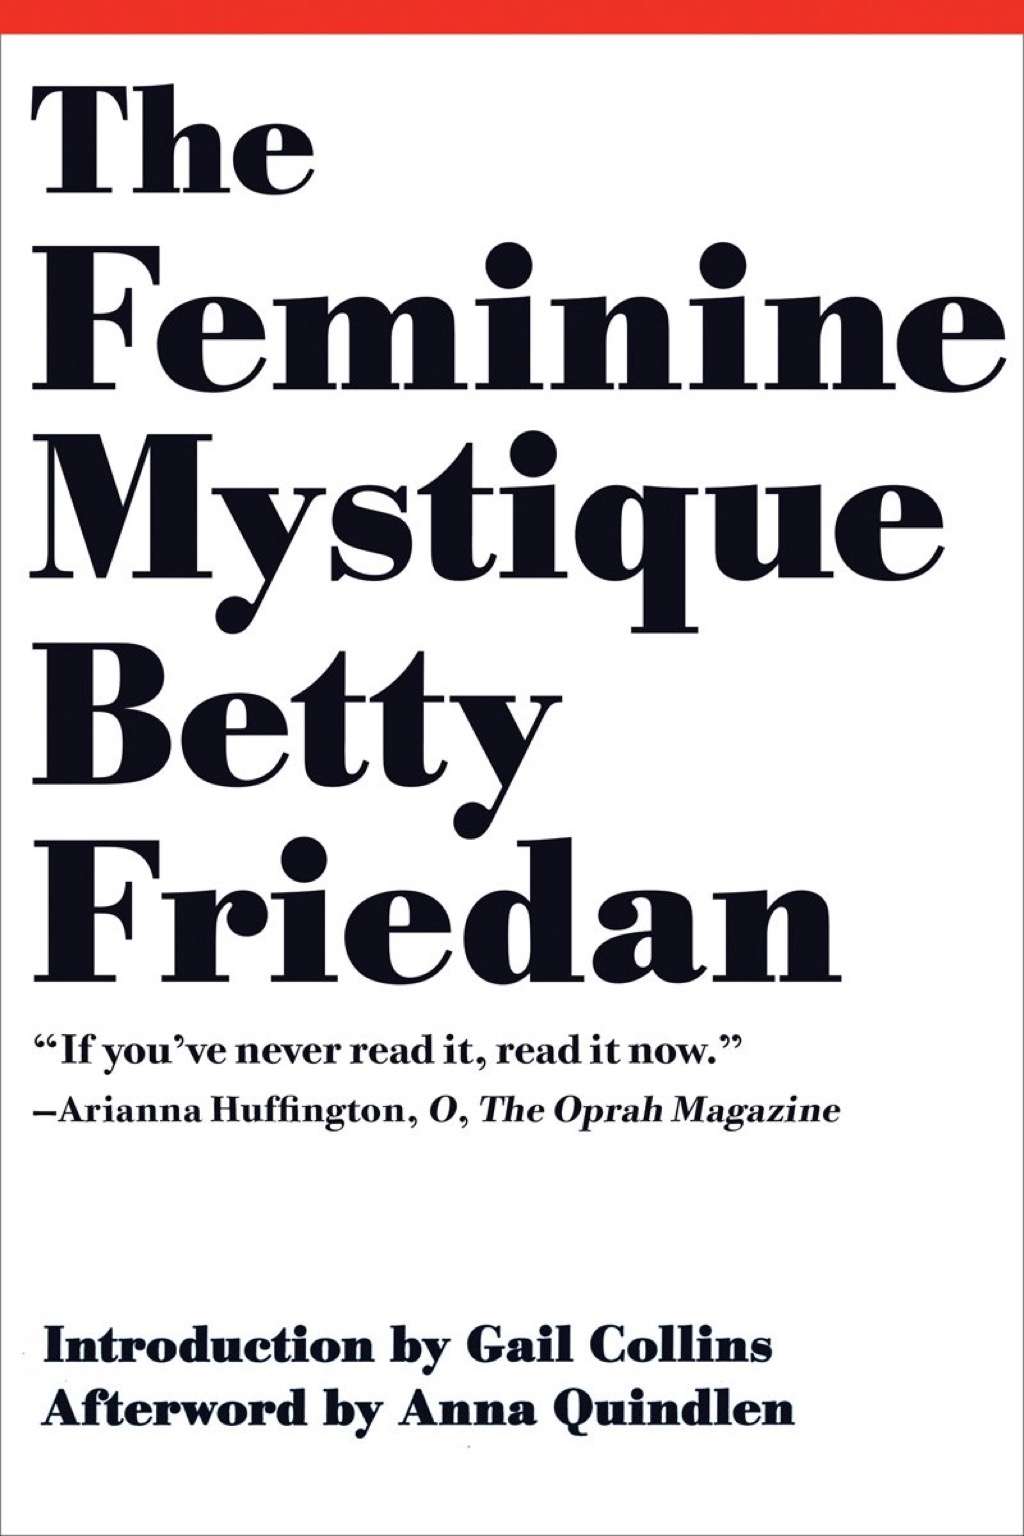 The Feminine Mystique books every woman should read in her 40s